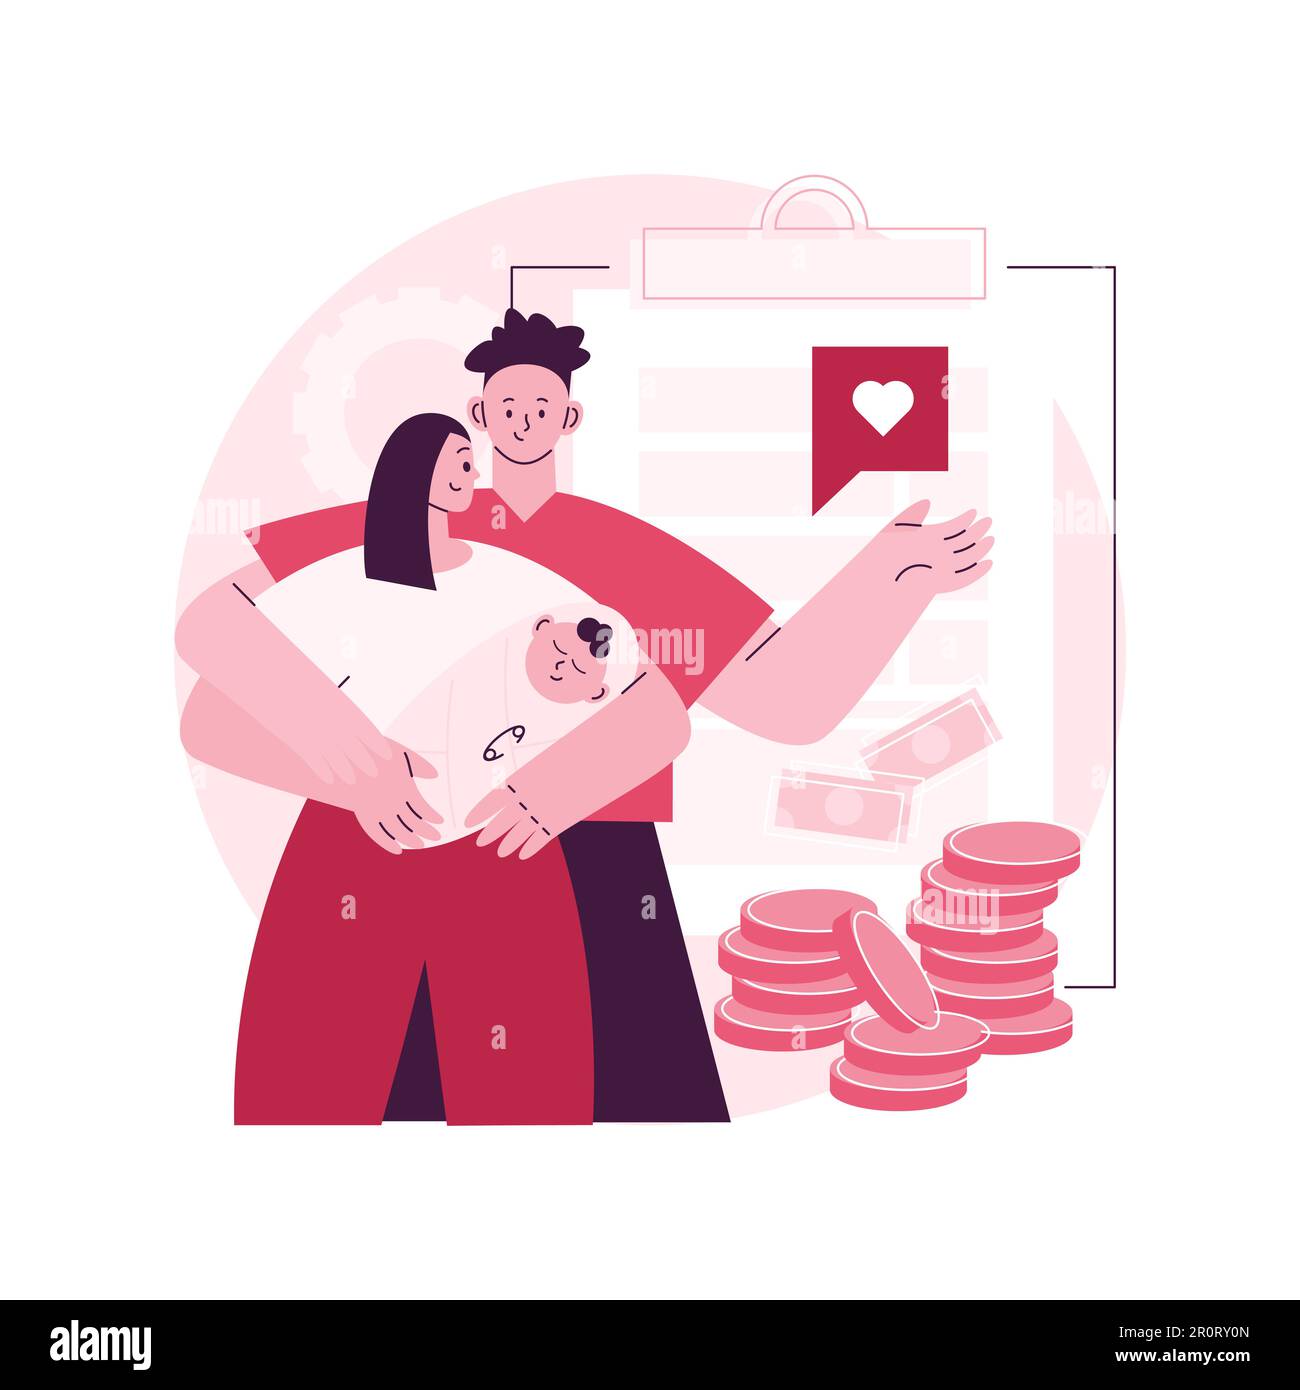 Child benefit abstract concept vector illustration. Dependent care costs, benefit plan, family income, budget planning, working parents support, social wealth, money in cash abstract metaphor. Stock Vector